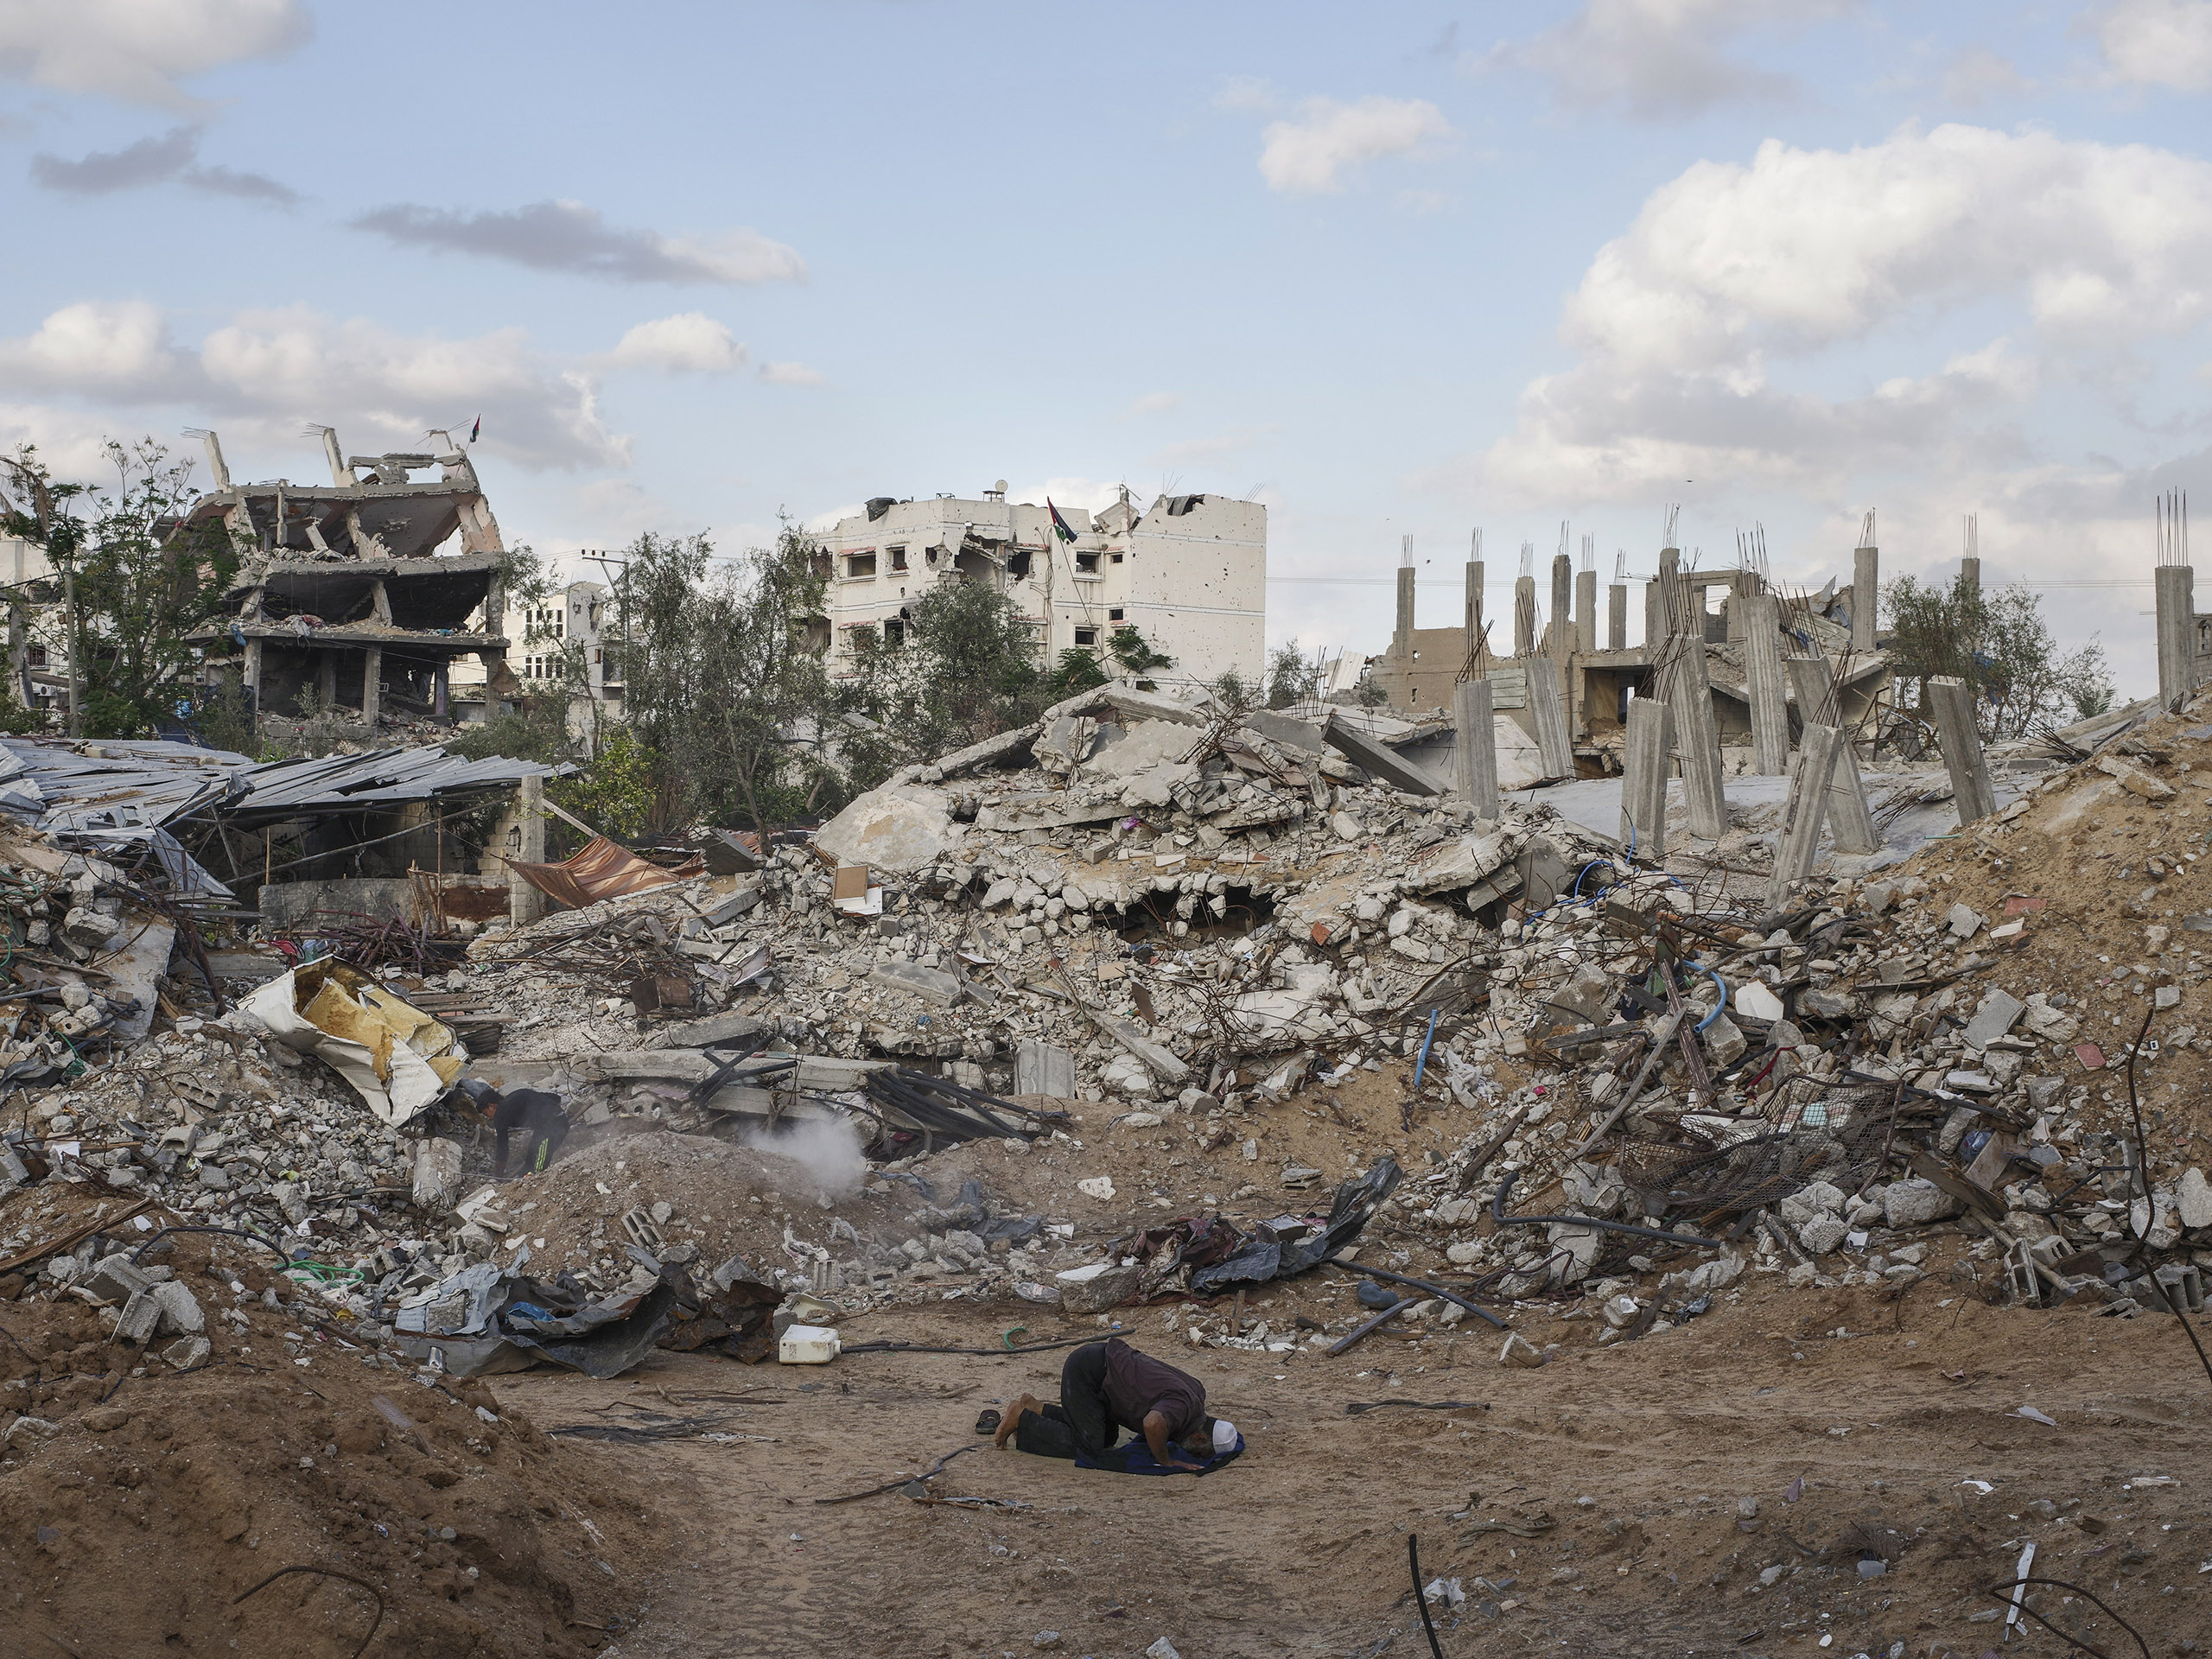 A Palestinian man prays in a Gaza neighborhood destroyed during the war last year between Hamas and Israel.From "The Path to Peace." January 19, 2015 issue. (Peter van Agtmael—Magnum for TIME)